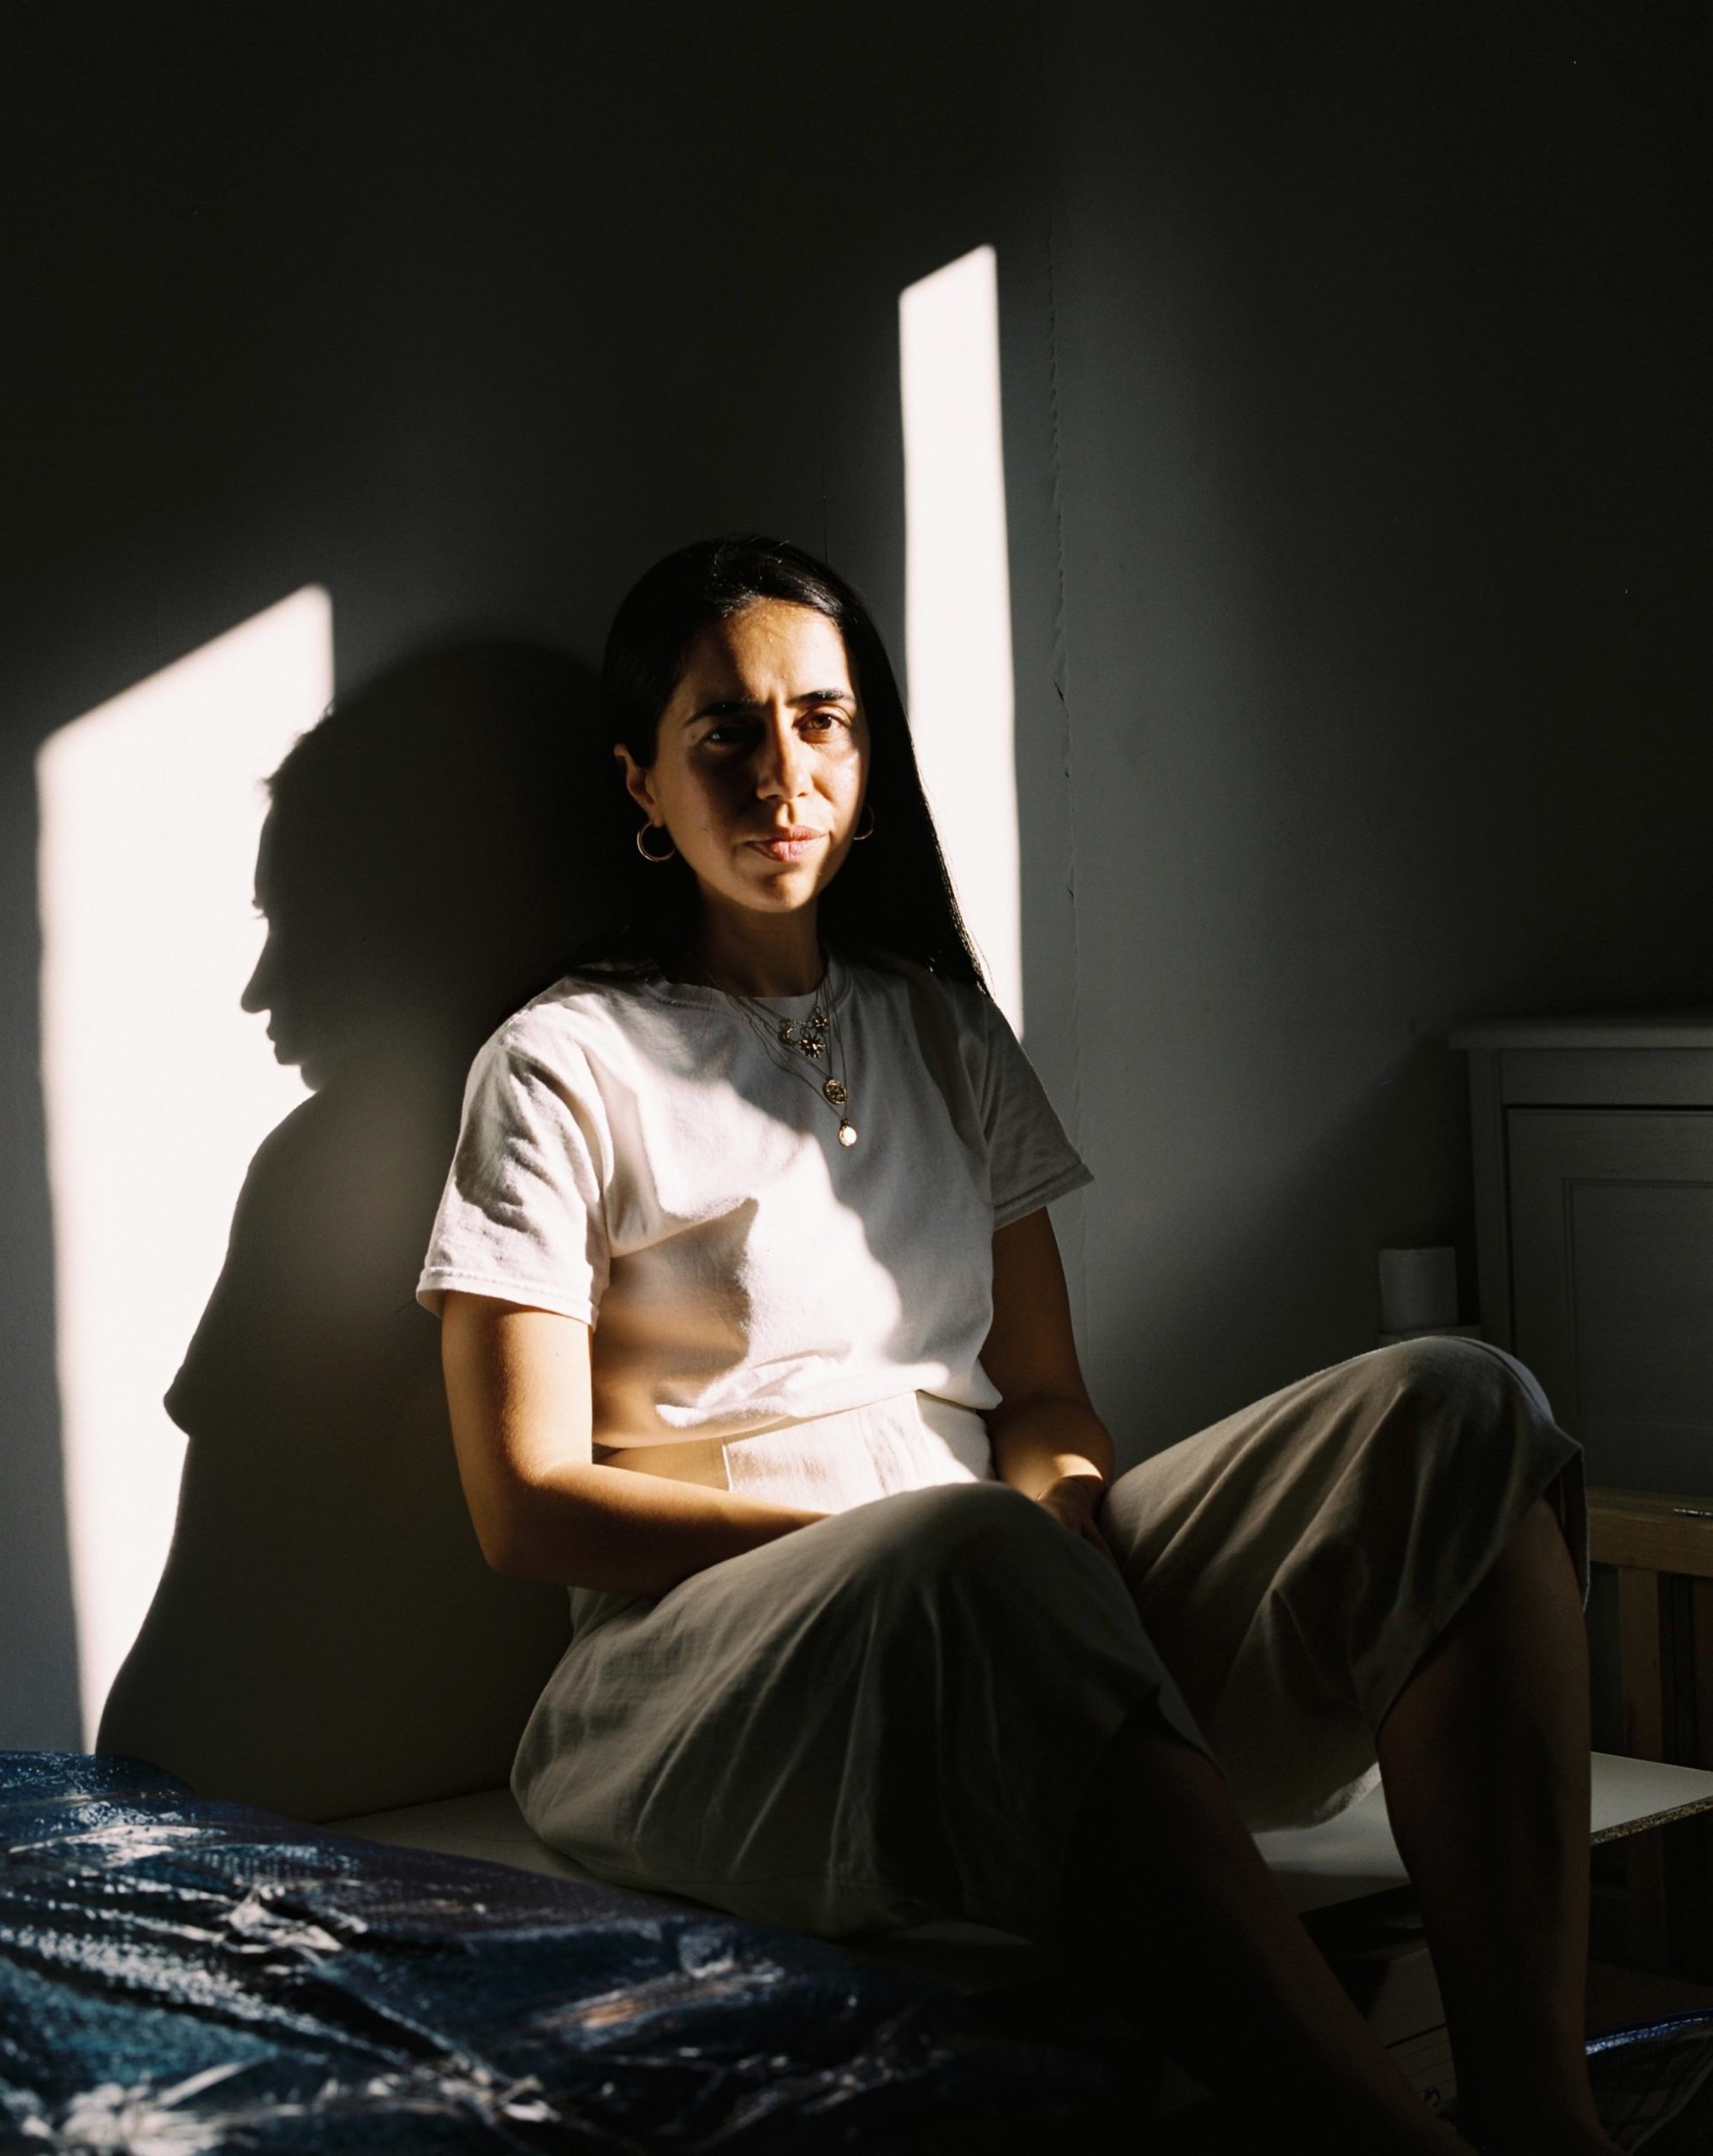 A person wearing a white shirt sits in partial light against a white wall